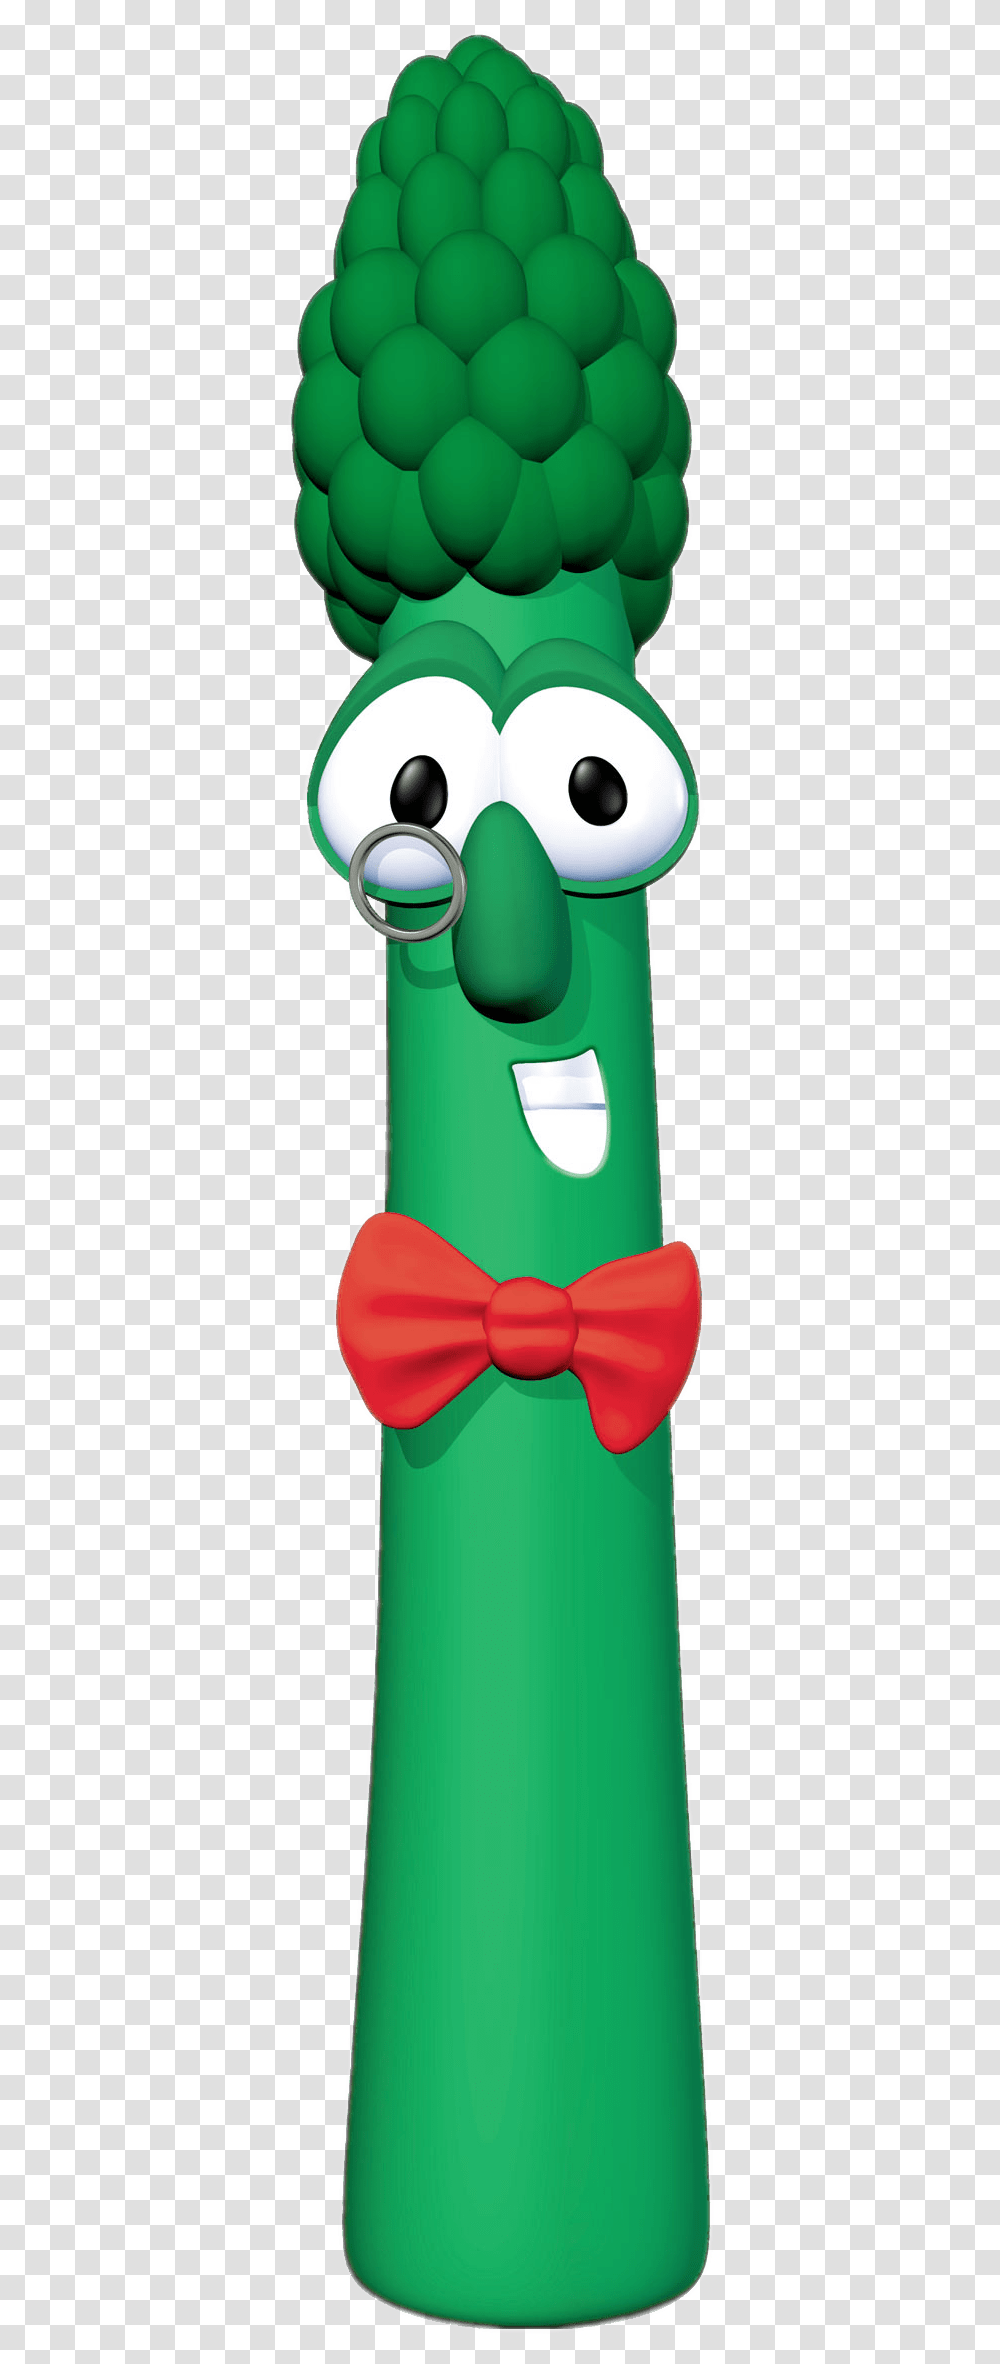 Archibald Asparagus With Red Bow Tie Archibald Asparagus, Accessories Transparent Png